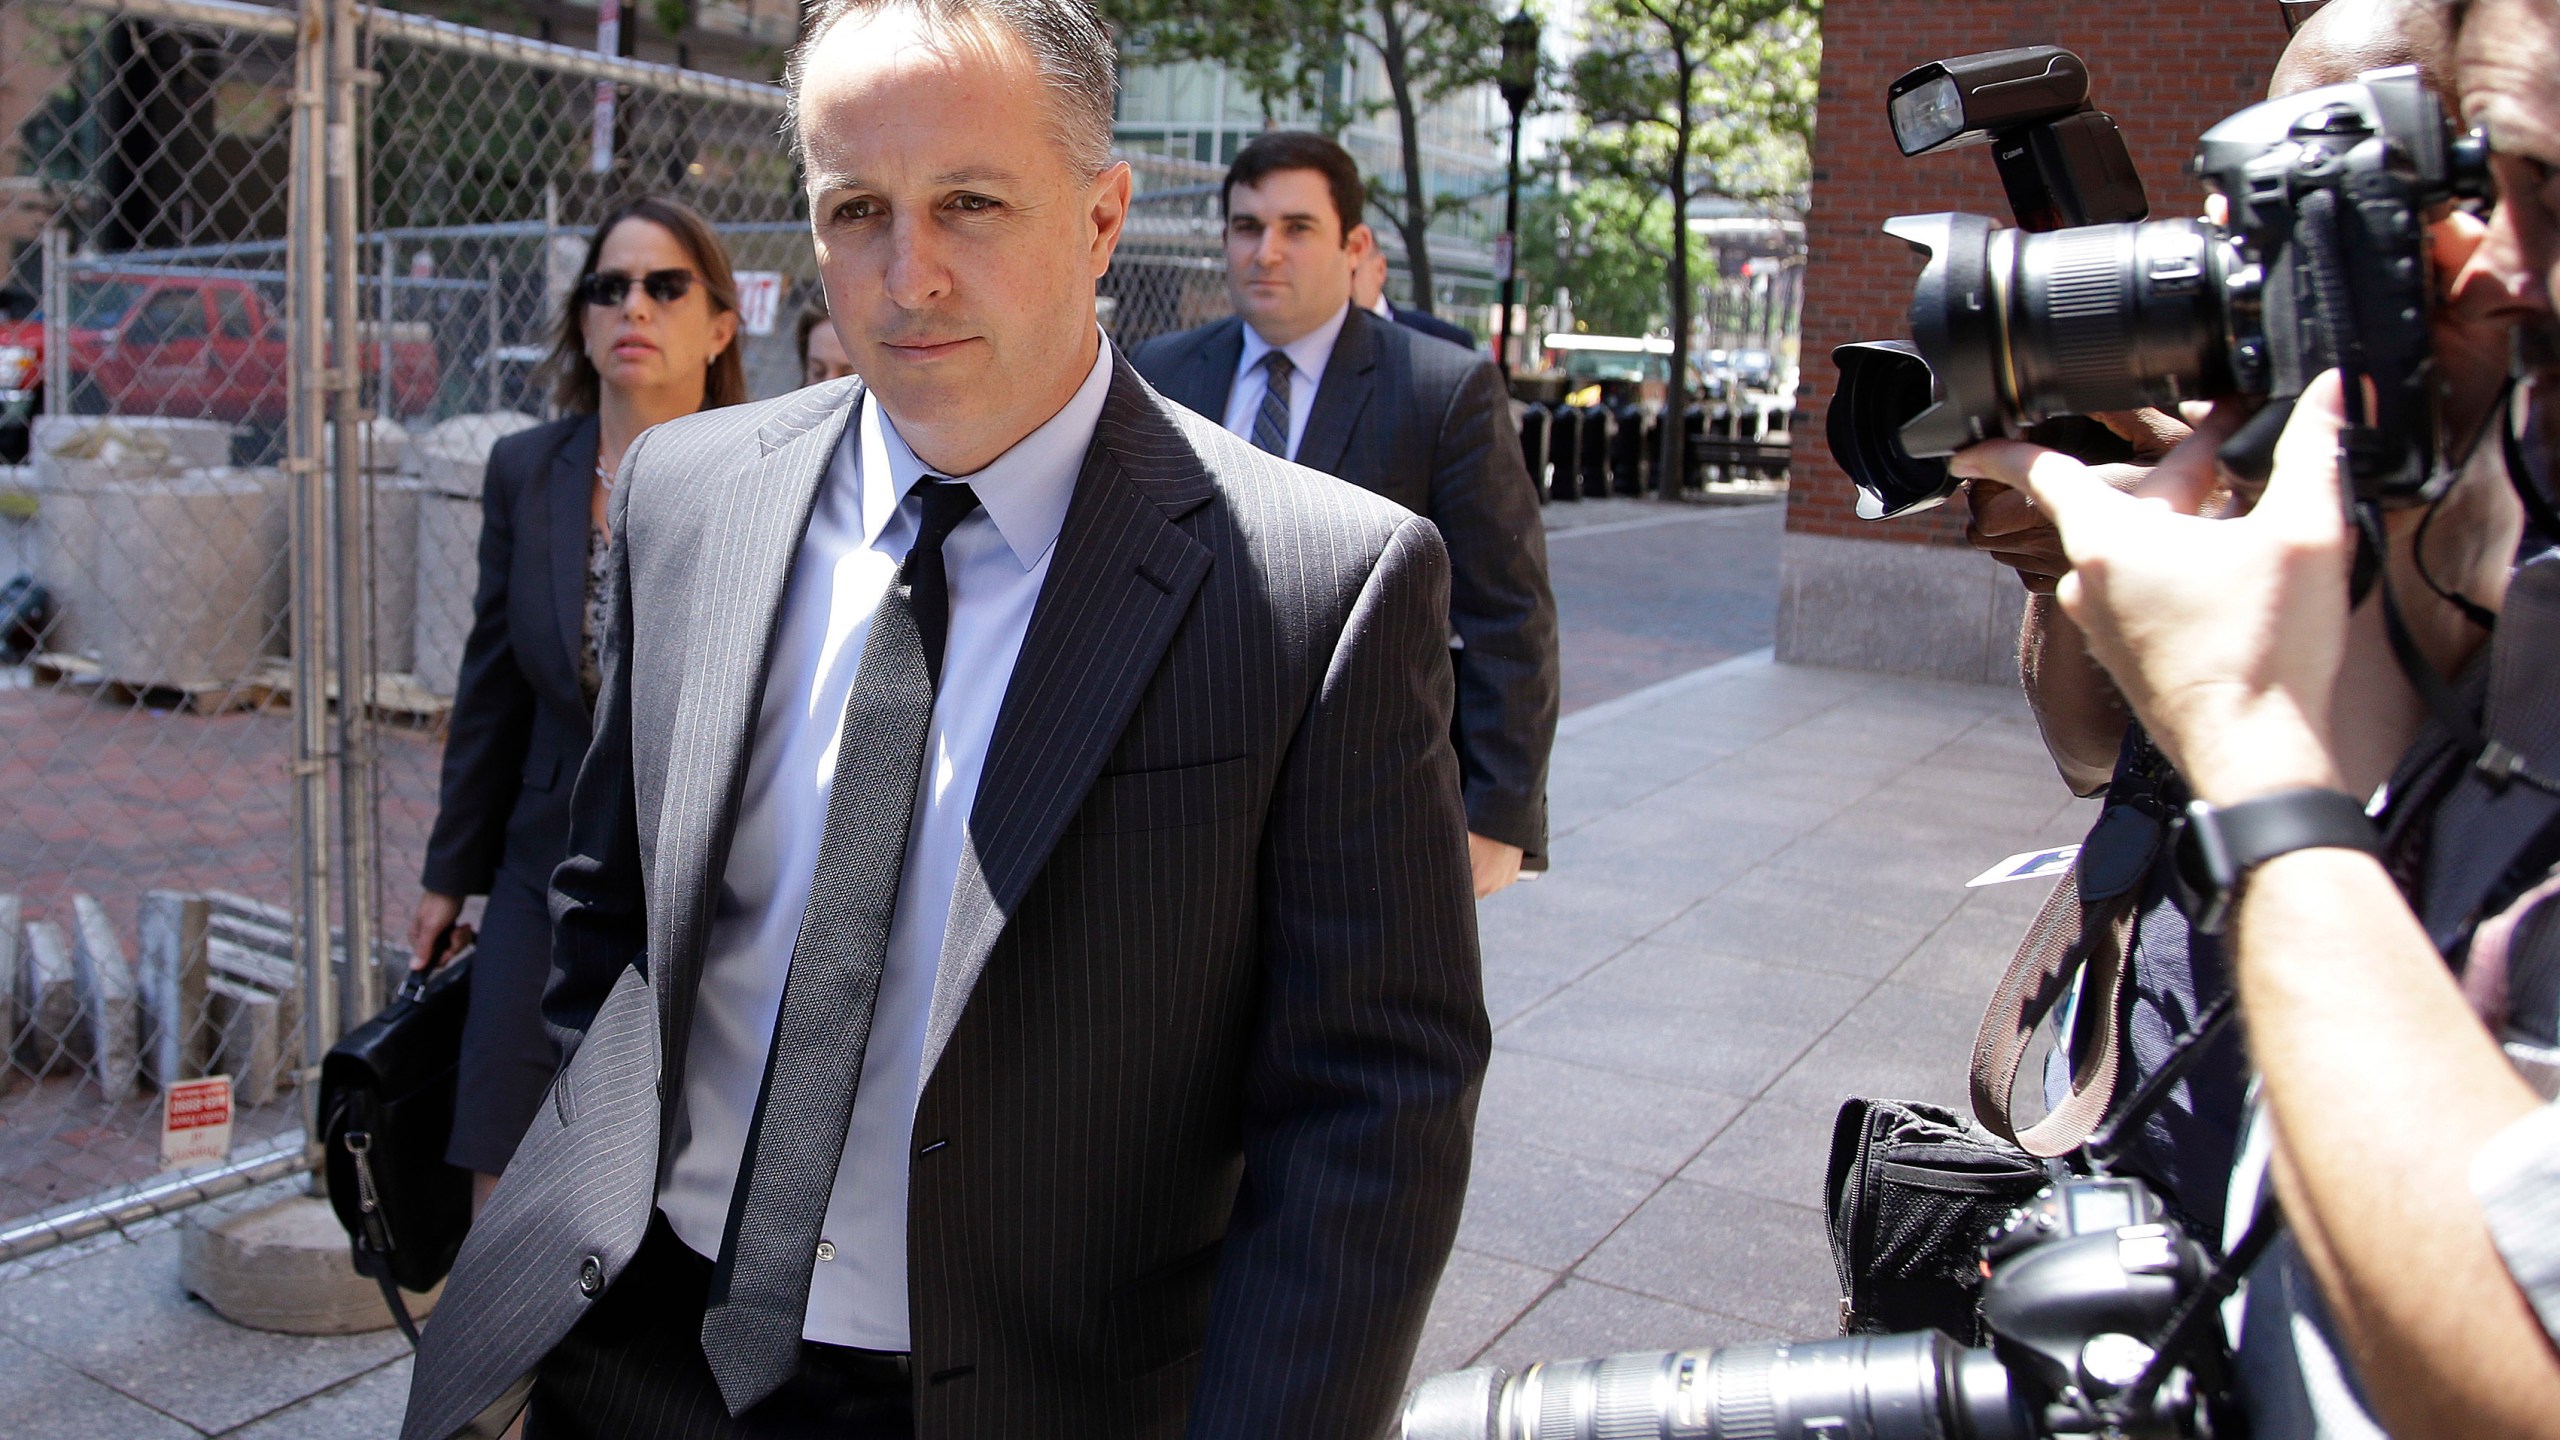 FILE - Barry Cadden, president of the New England Compounding Center, followed by members of his legal team, arrive at the federal courthouse for sentencing, June 26, 2017, in Boston. The co-founder of a specialty pharmacy that was at the center of a deadly national meningitis outbreak in 2012 pleaded no contest to involuntary manslaughter in Michigan, authorities said Tuesday, March 5, 2024. (AP Photo/Stephan Savoia, file)